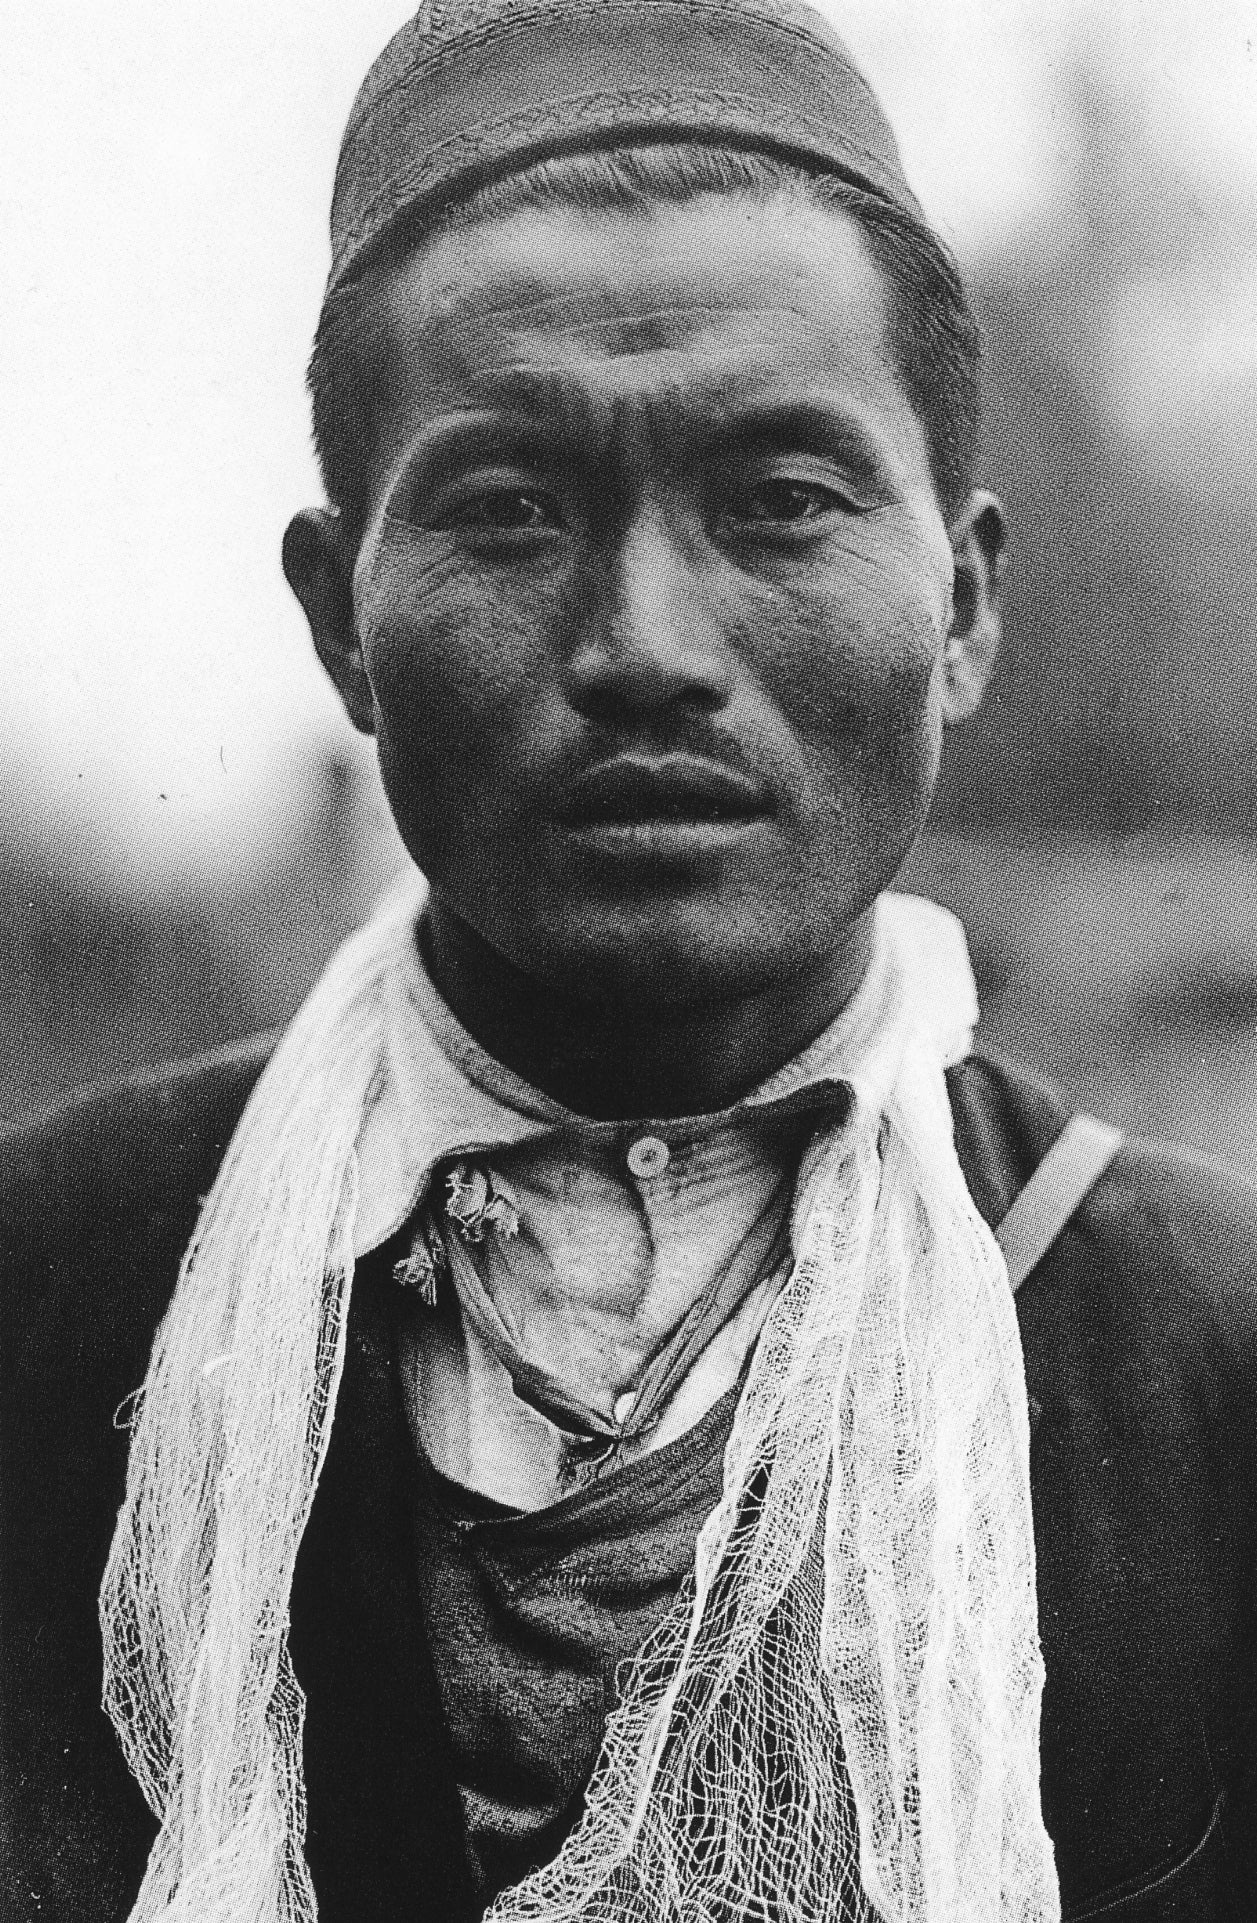 A black and white photograph taken by Frank Smythe in the Himalaya in 1933. It appears in the new book, Headstrap.